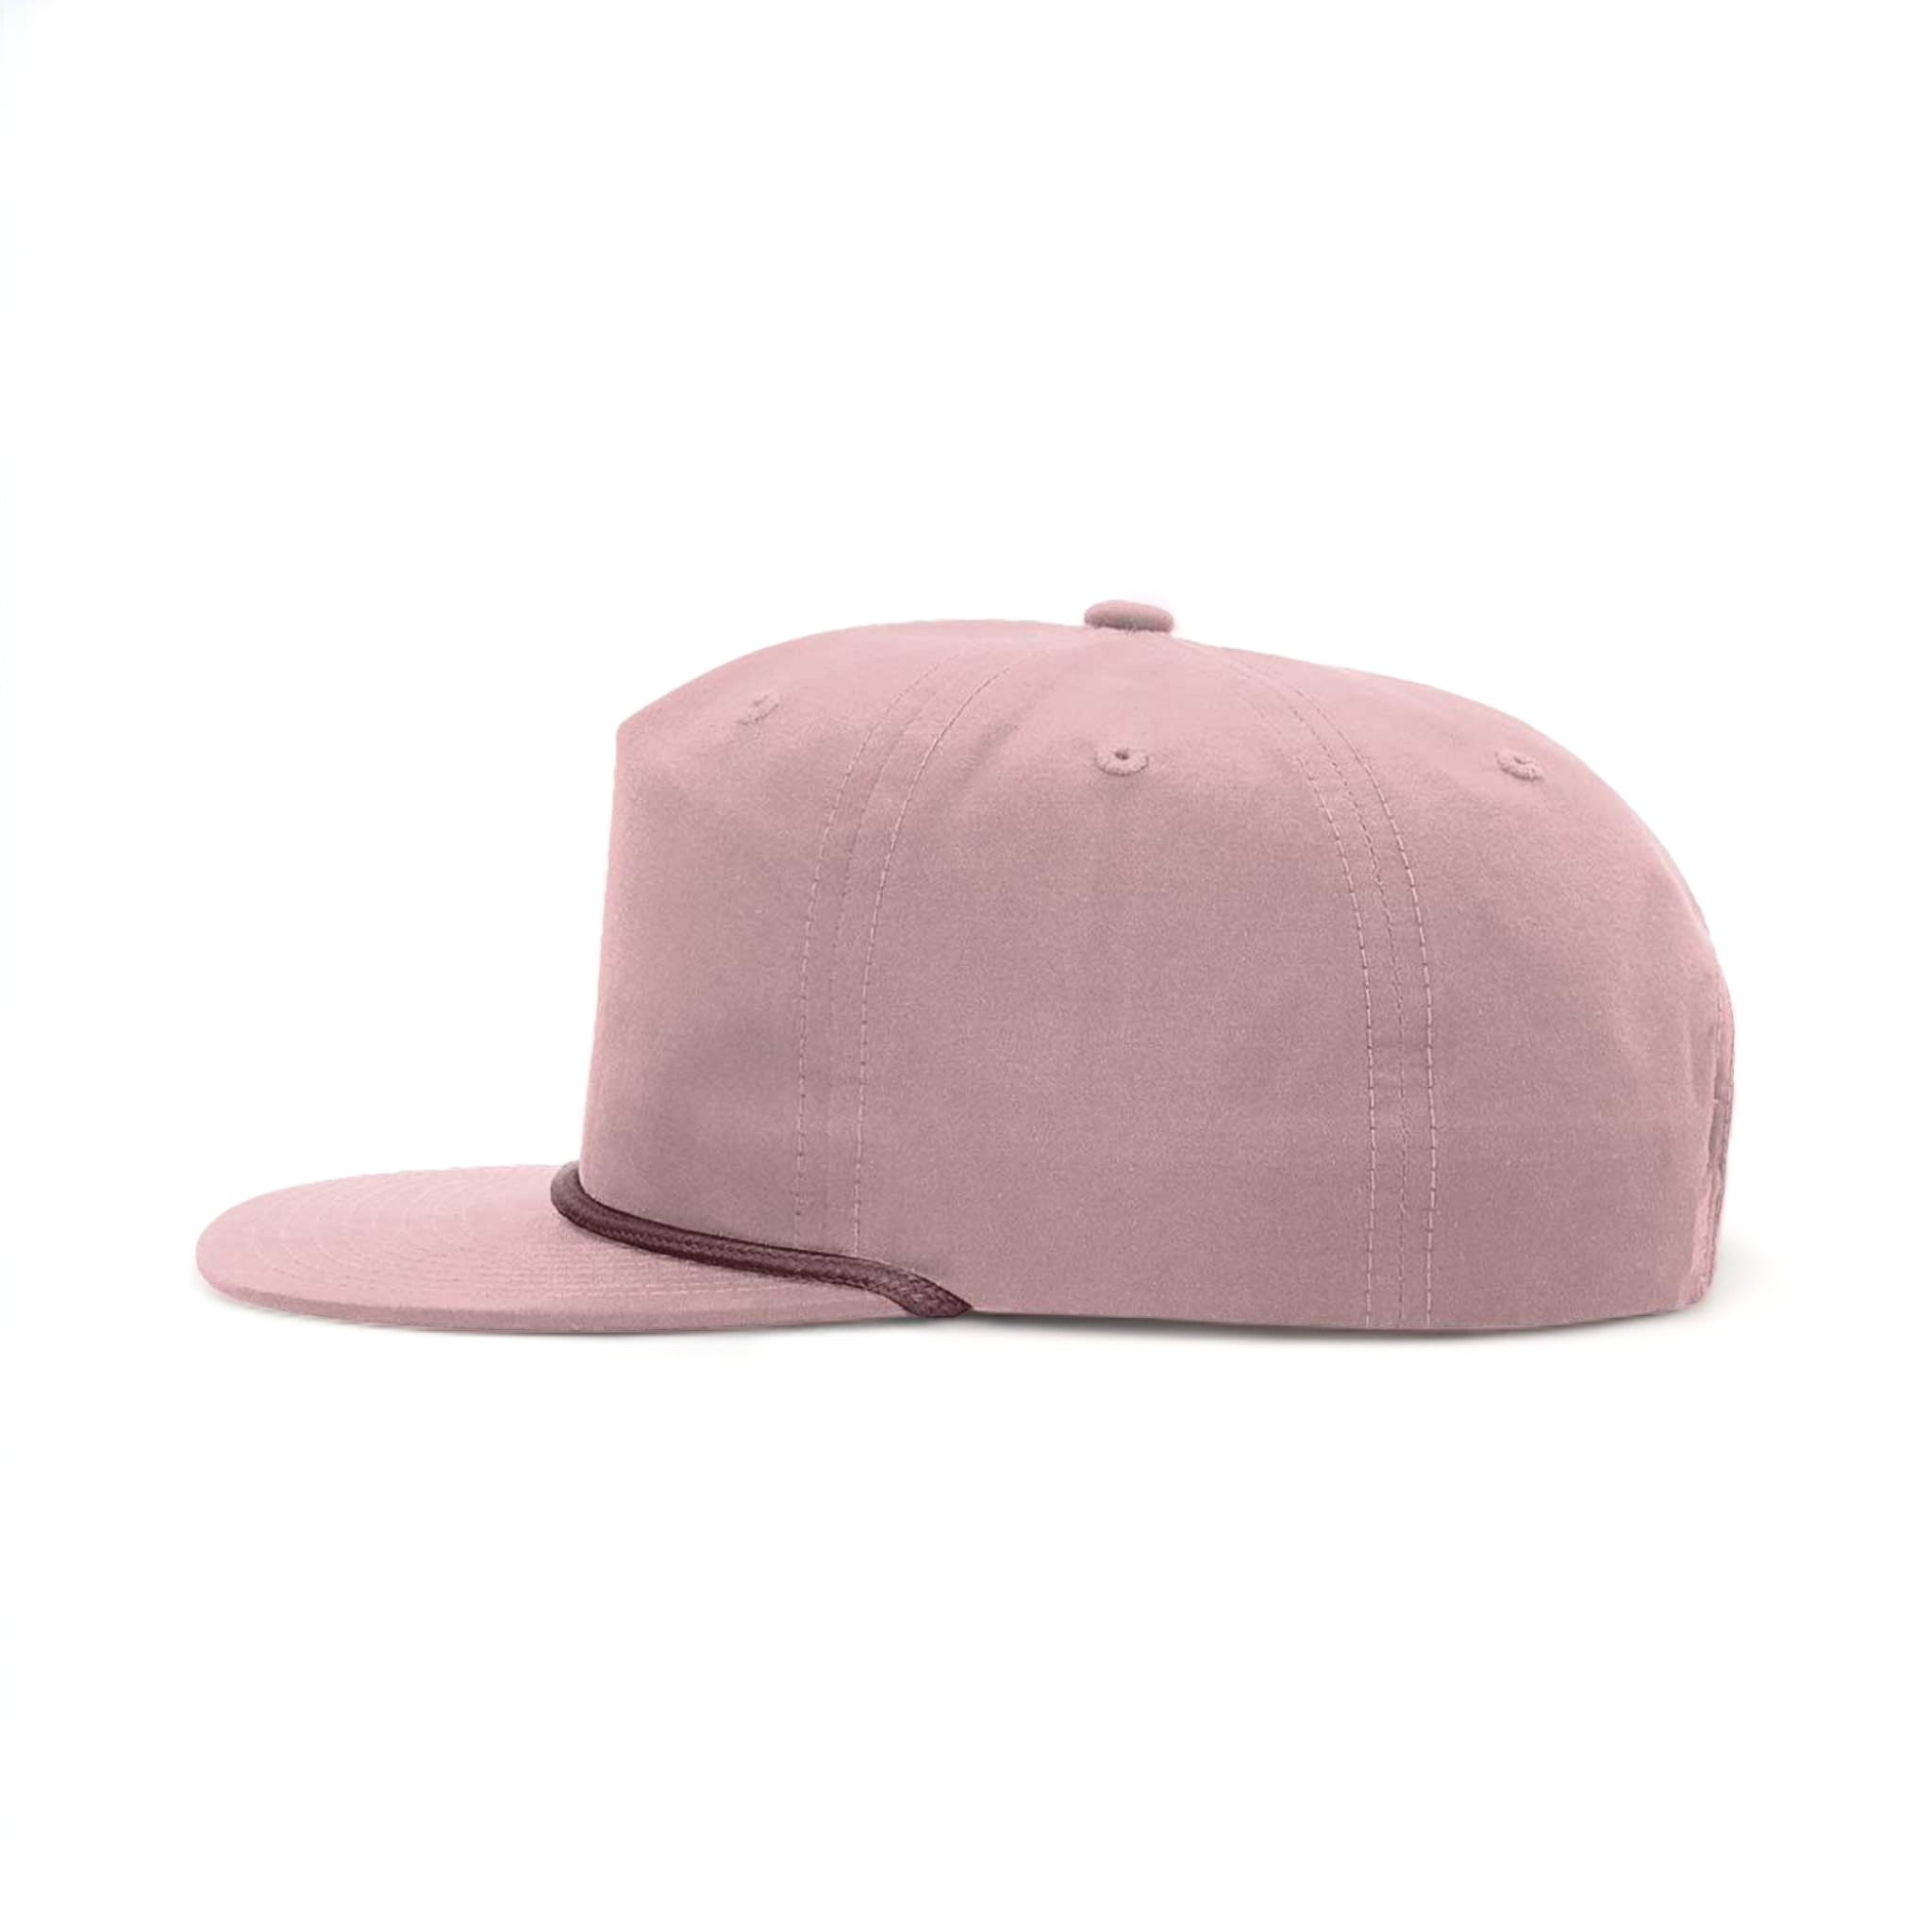 Side view of Richardson 256 custom hat in pale peach and maroon